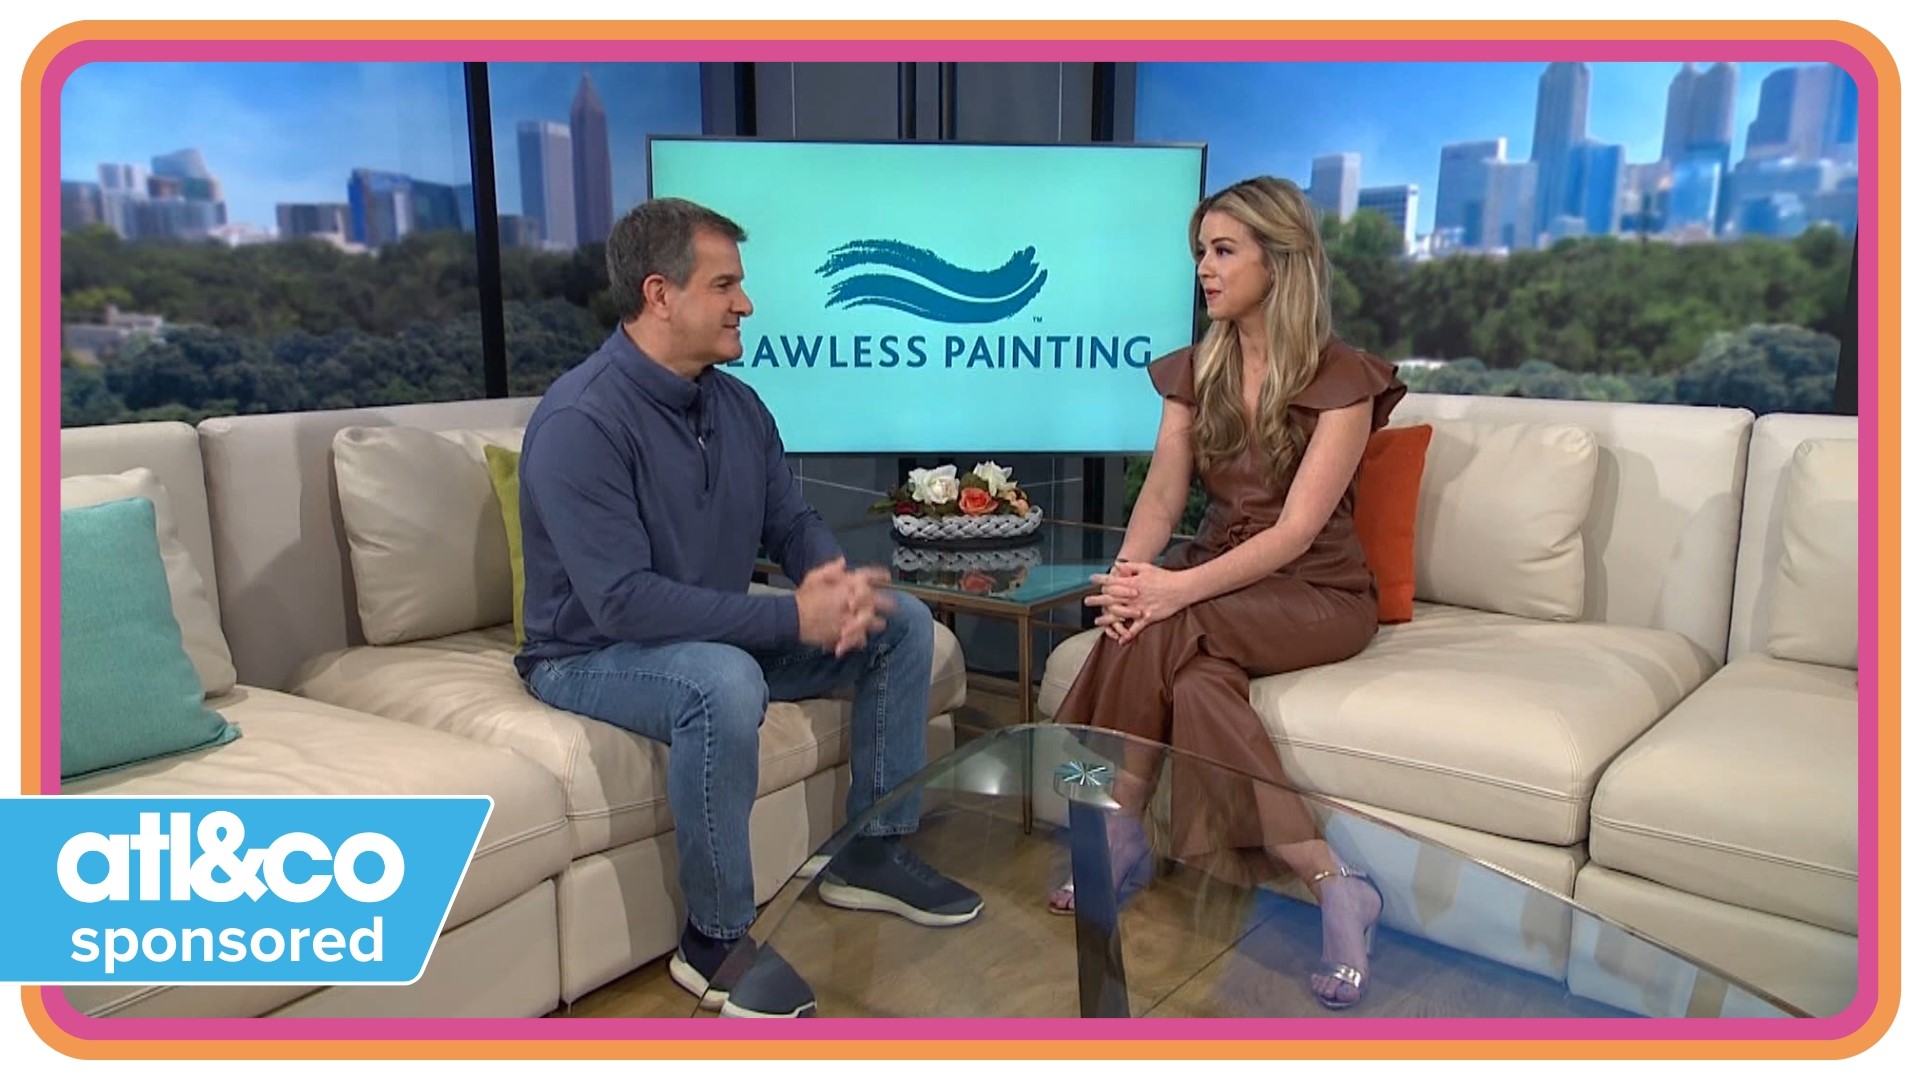 Flawless Painting CEO Scott Csaszar shares service options and details on a special offer for viewers.